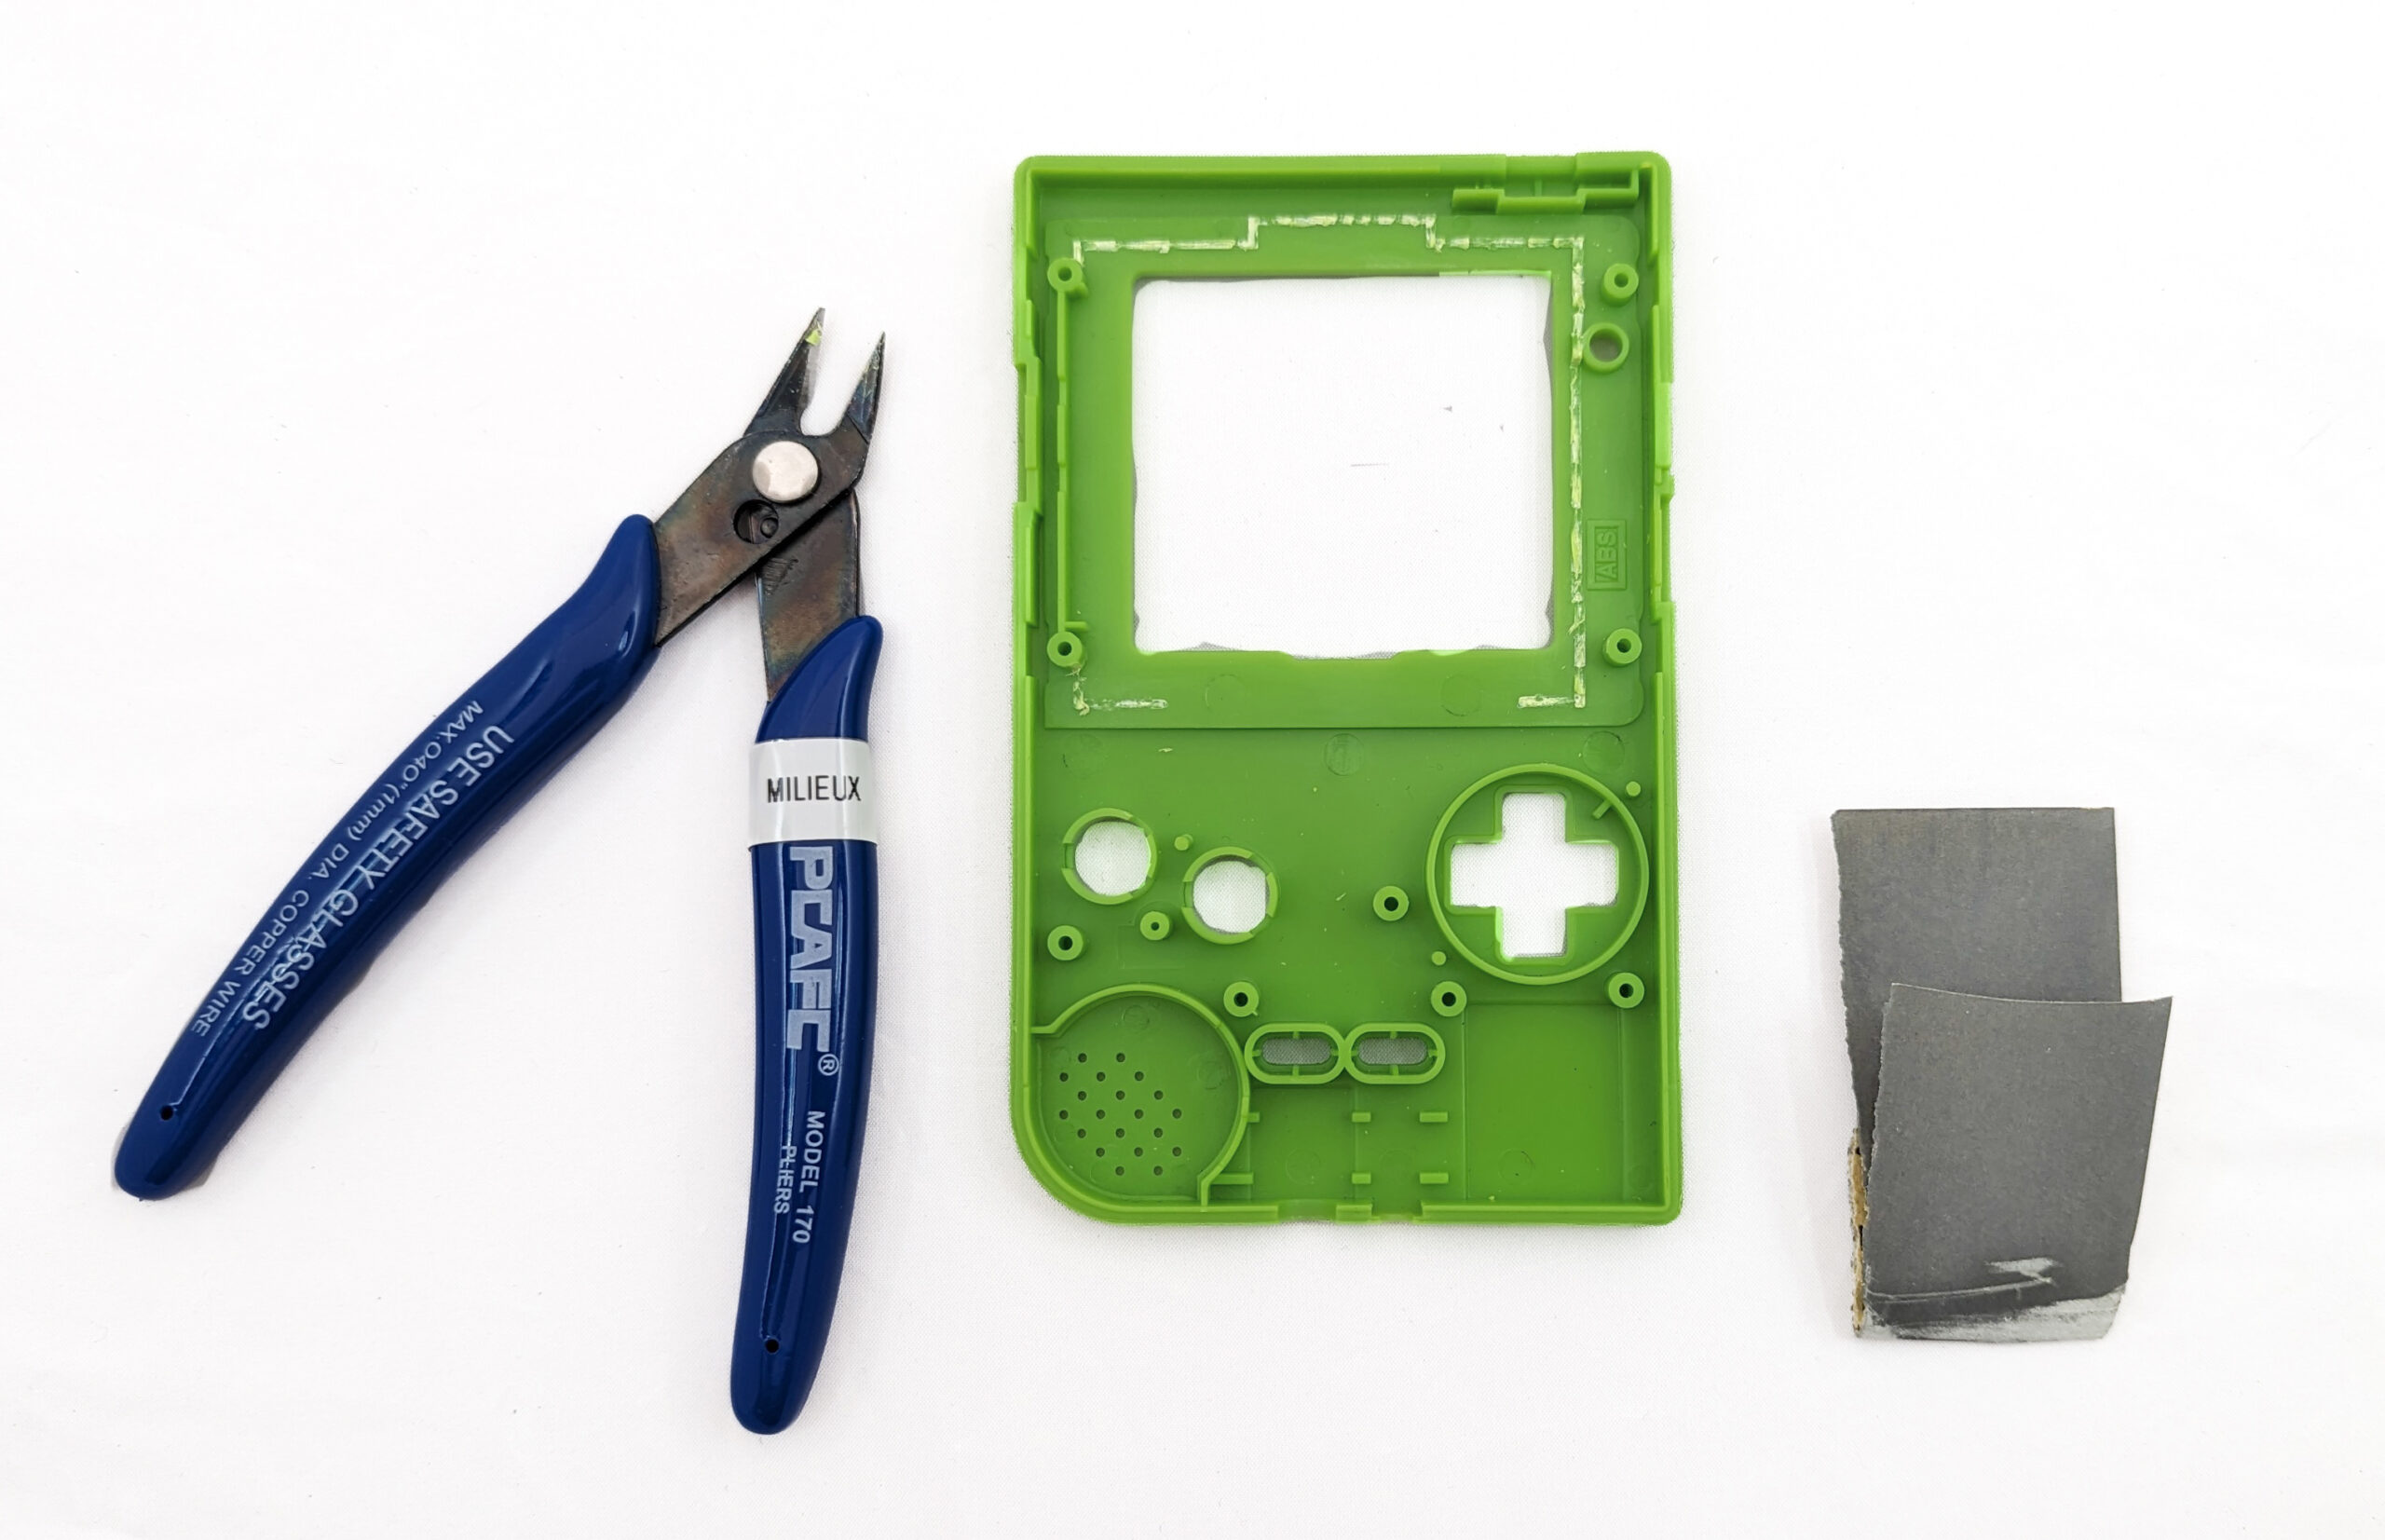 A green game boy shell next to a pair of flush cutters